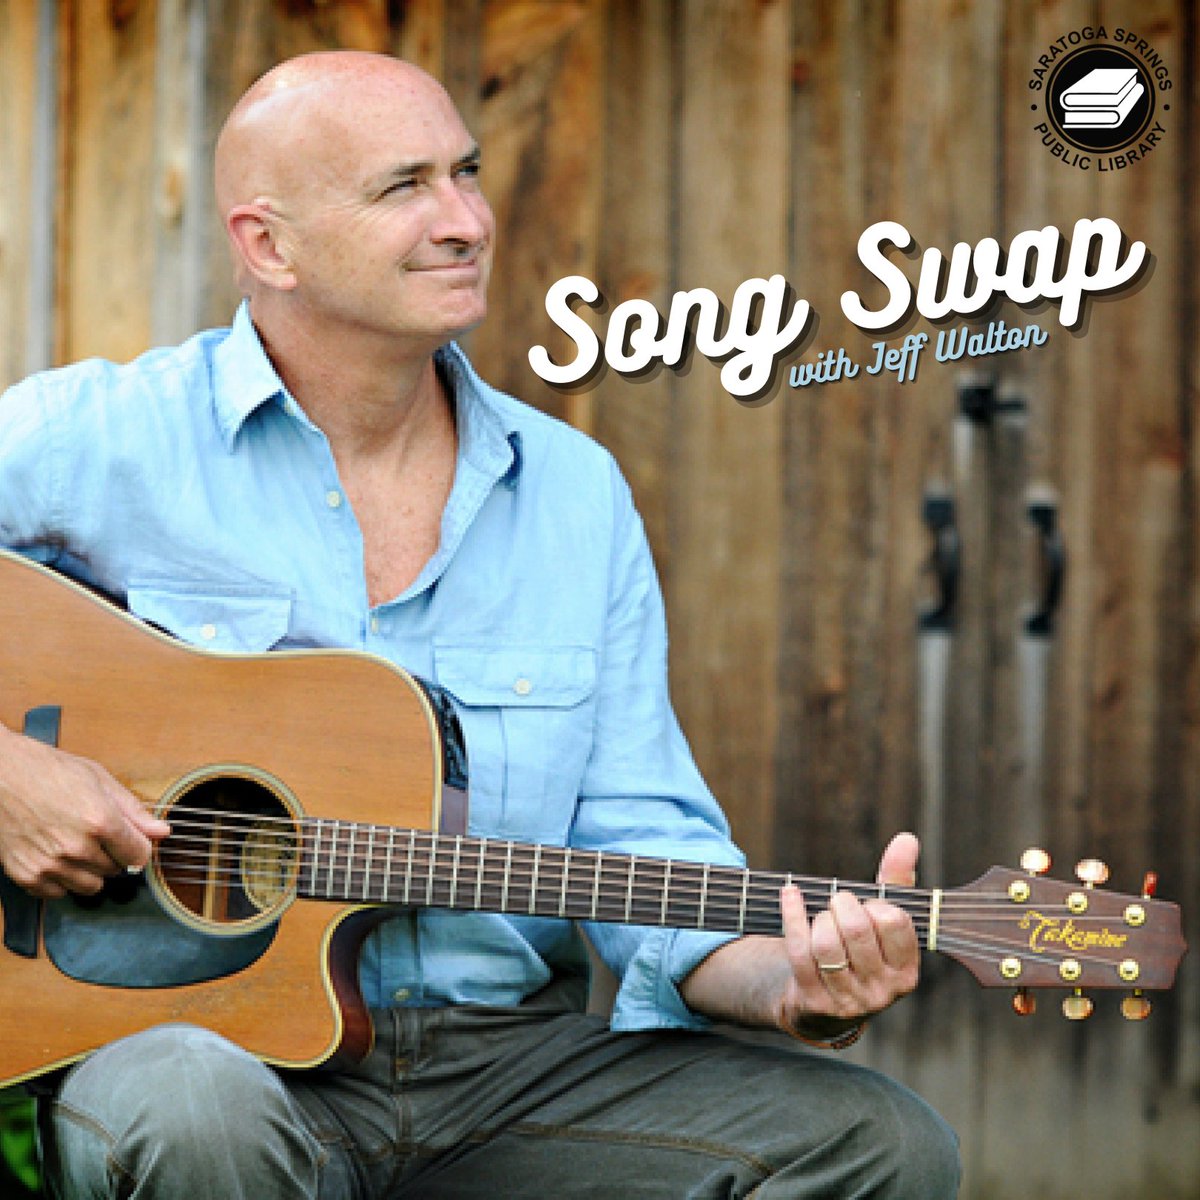 Jeff Walton is back TONIGHT for another #SongSwap! Please join us at 7 p.m. in the Community Room! Register here: sspl.libcal.com/event/10287081 #SSPL #SaratogaLibrary #LiveMusic #Music #Saratoga